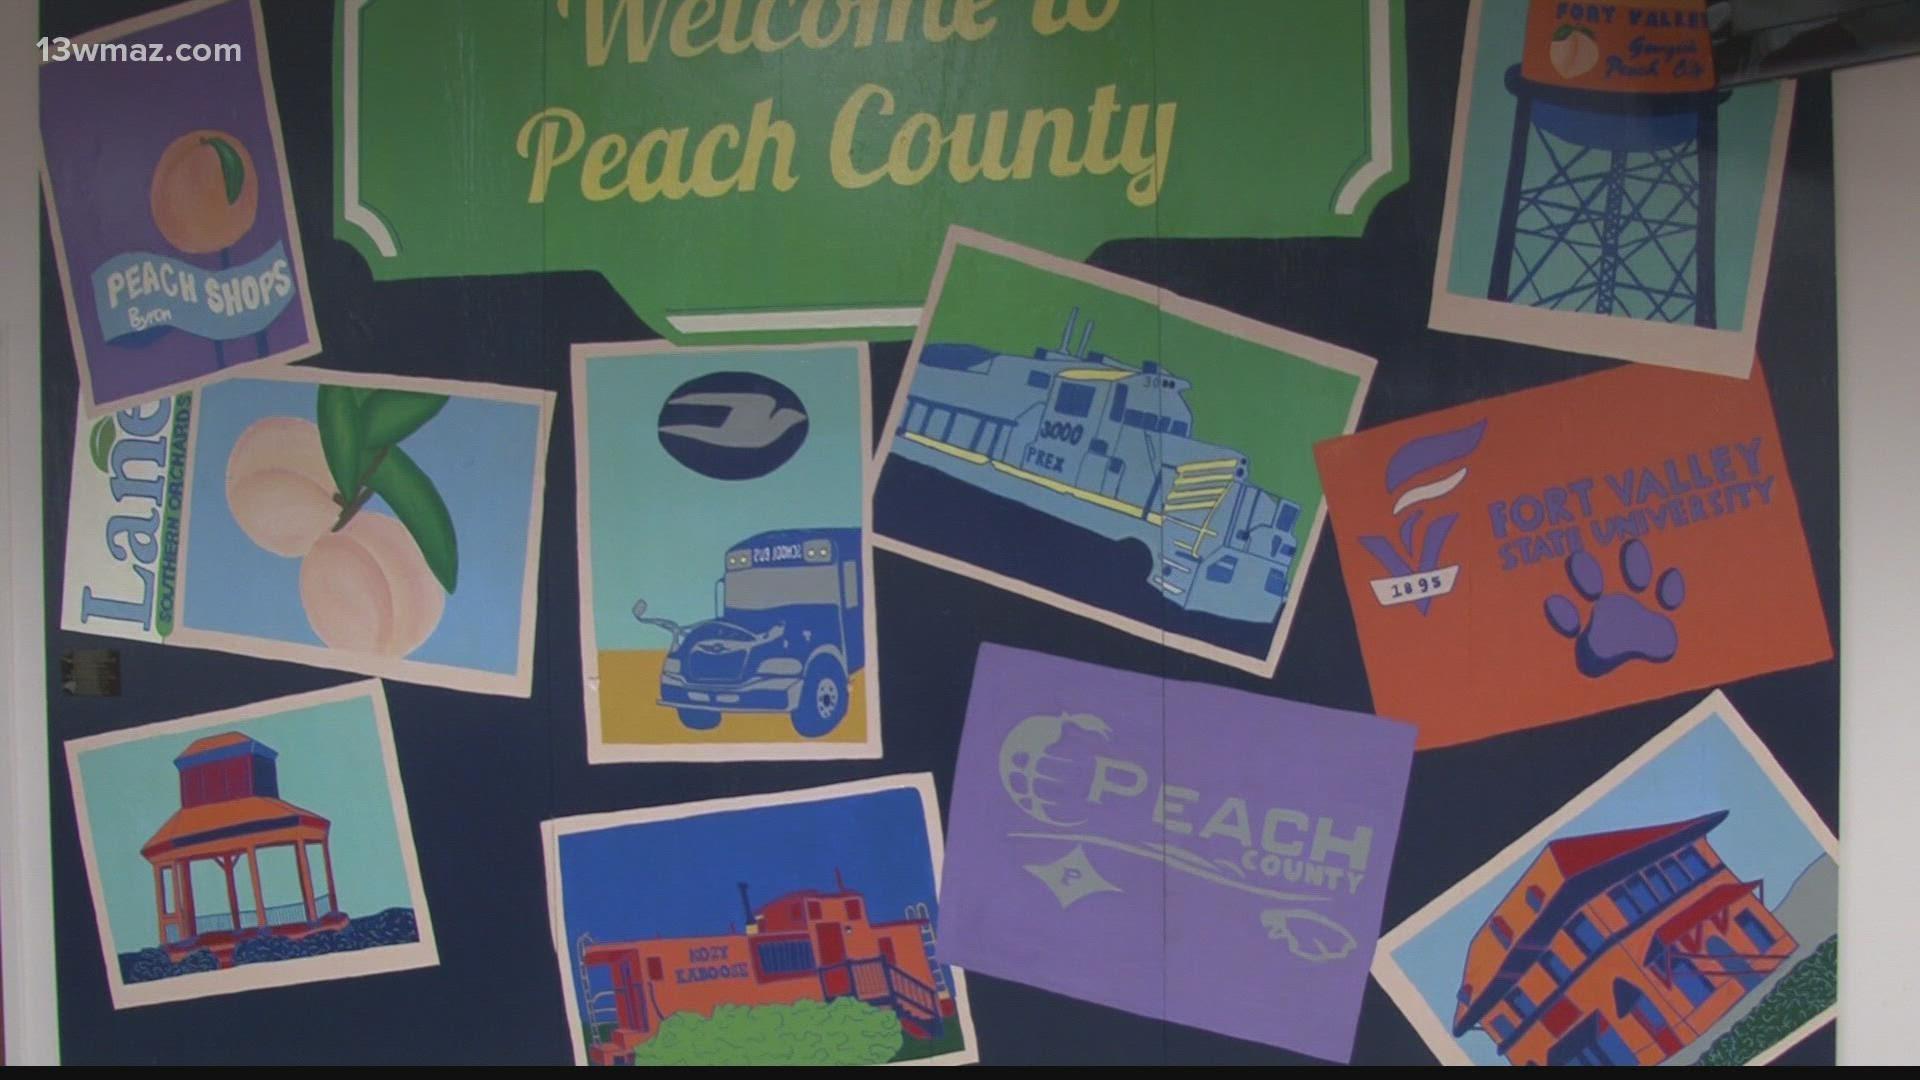 The visual arts team at Peach County High School decided to surprise the commissioner's office with a gift.